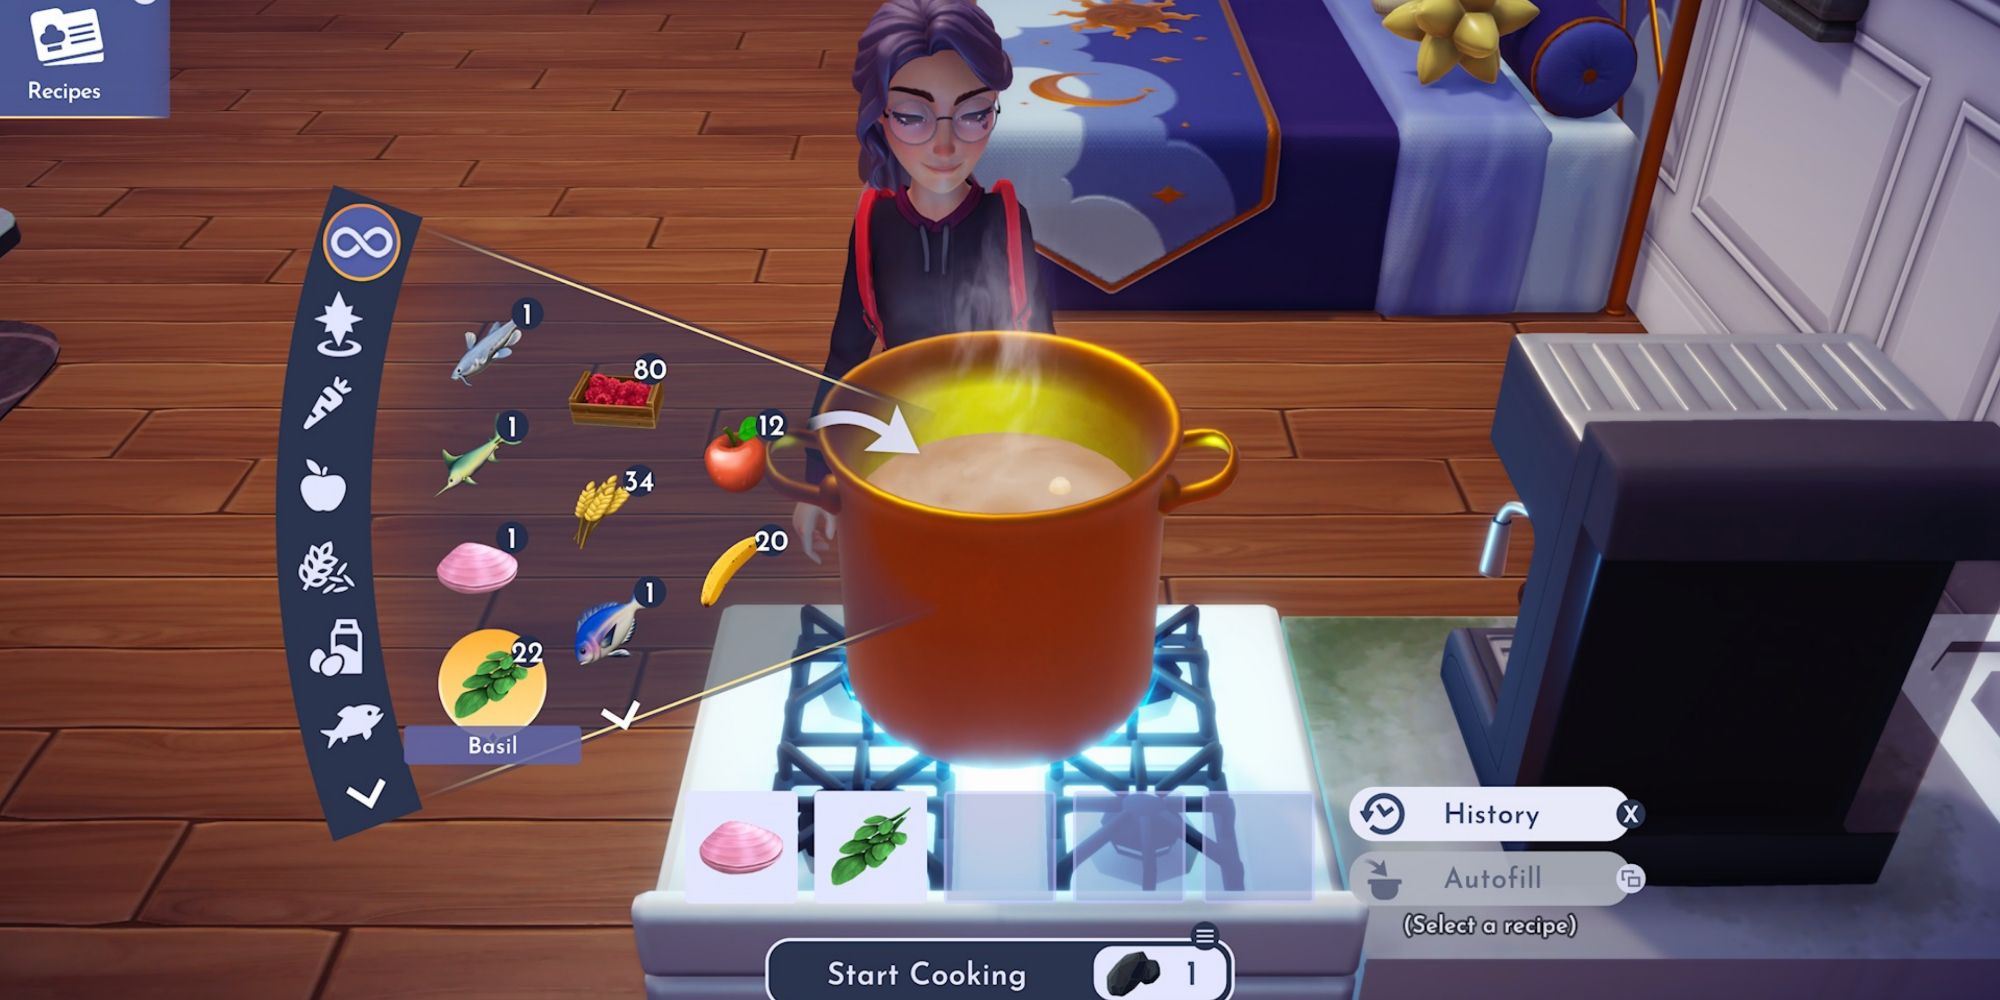 using stove in player's house